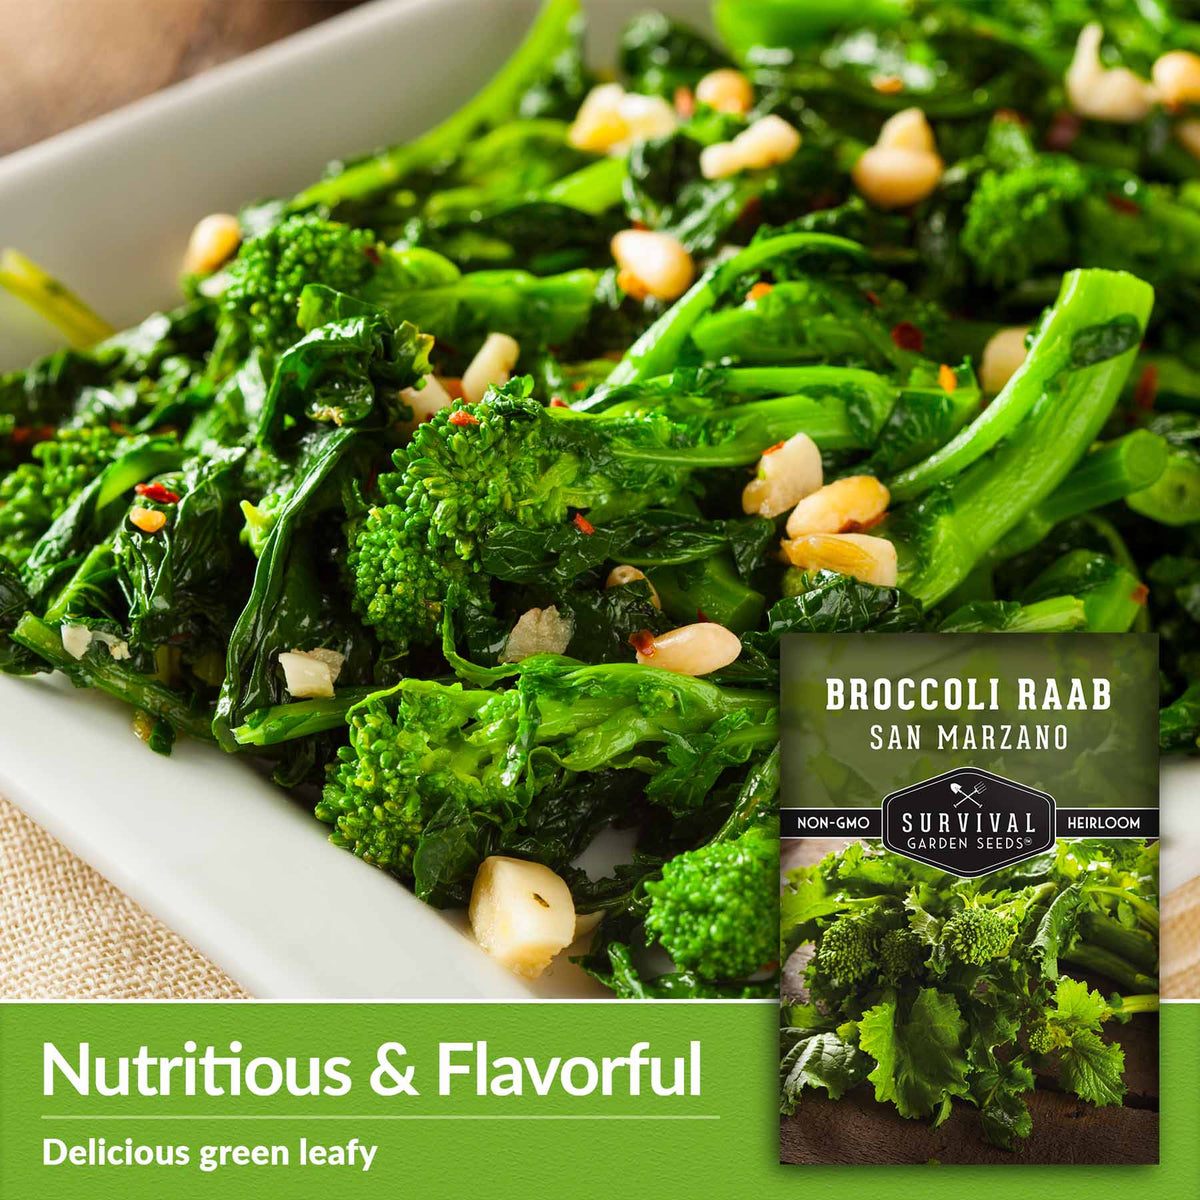 Nutritious and Flavorful - Delicious green leafy